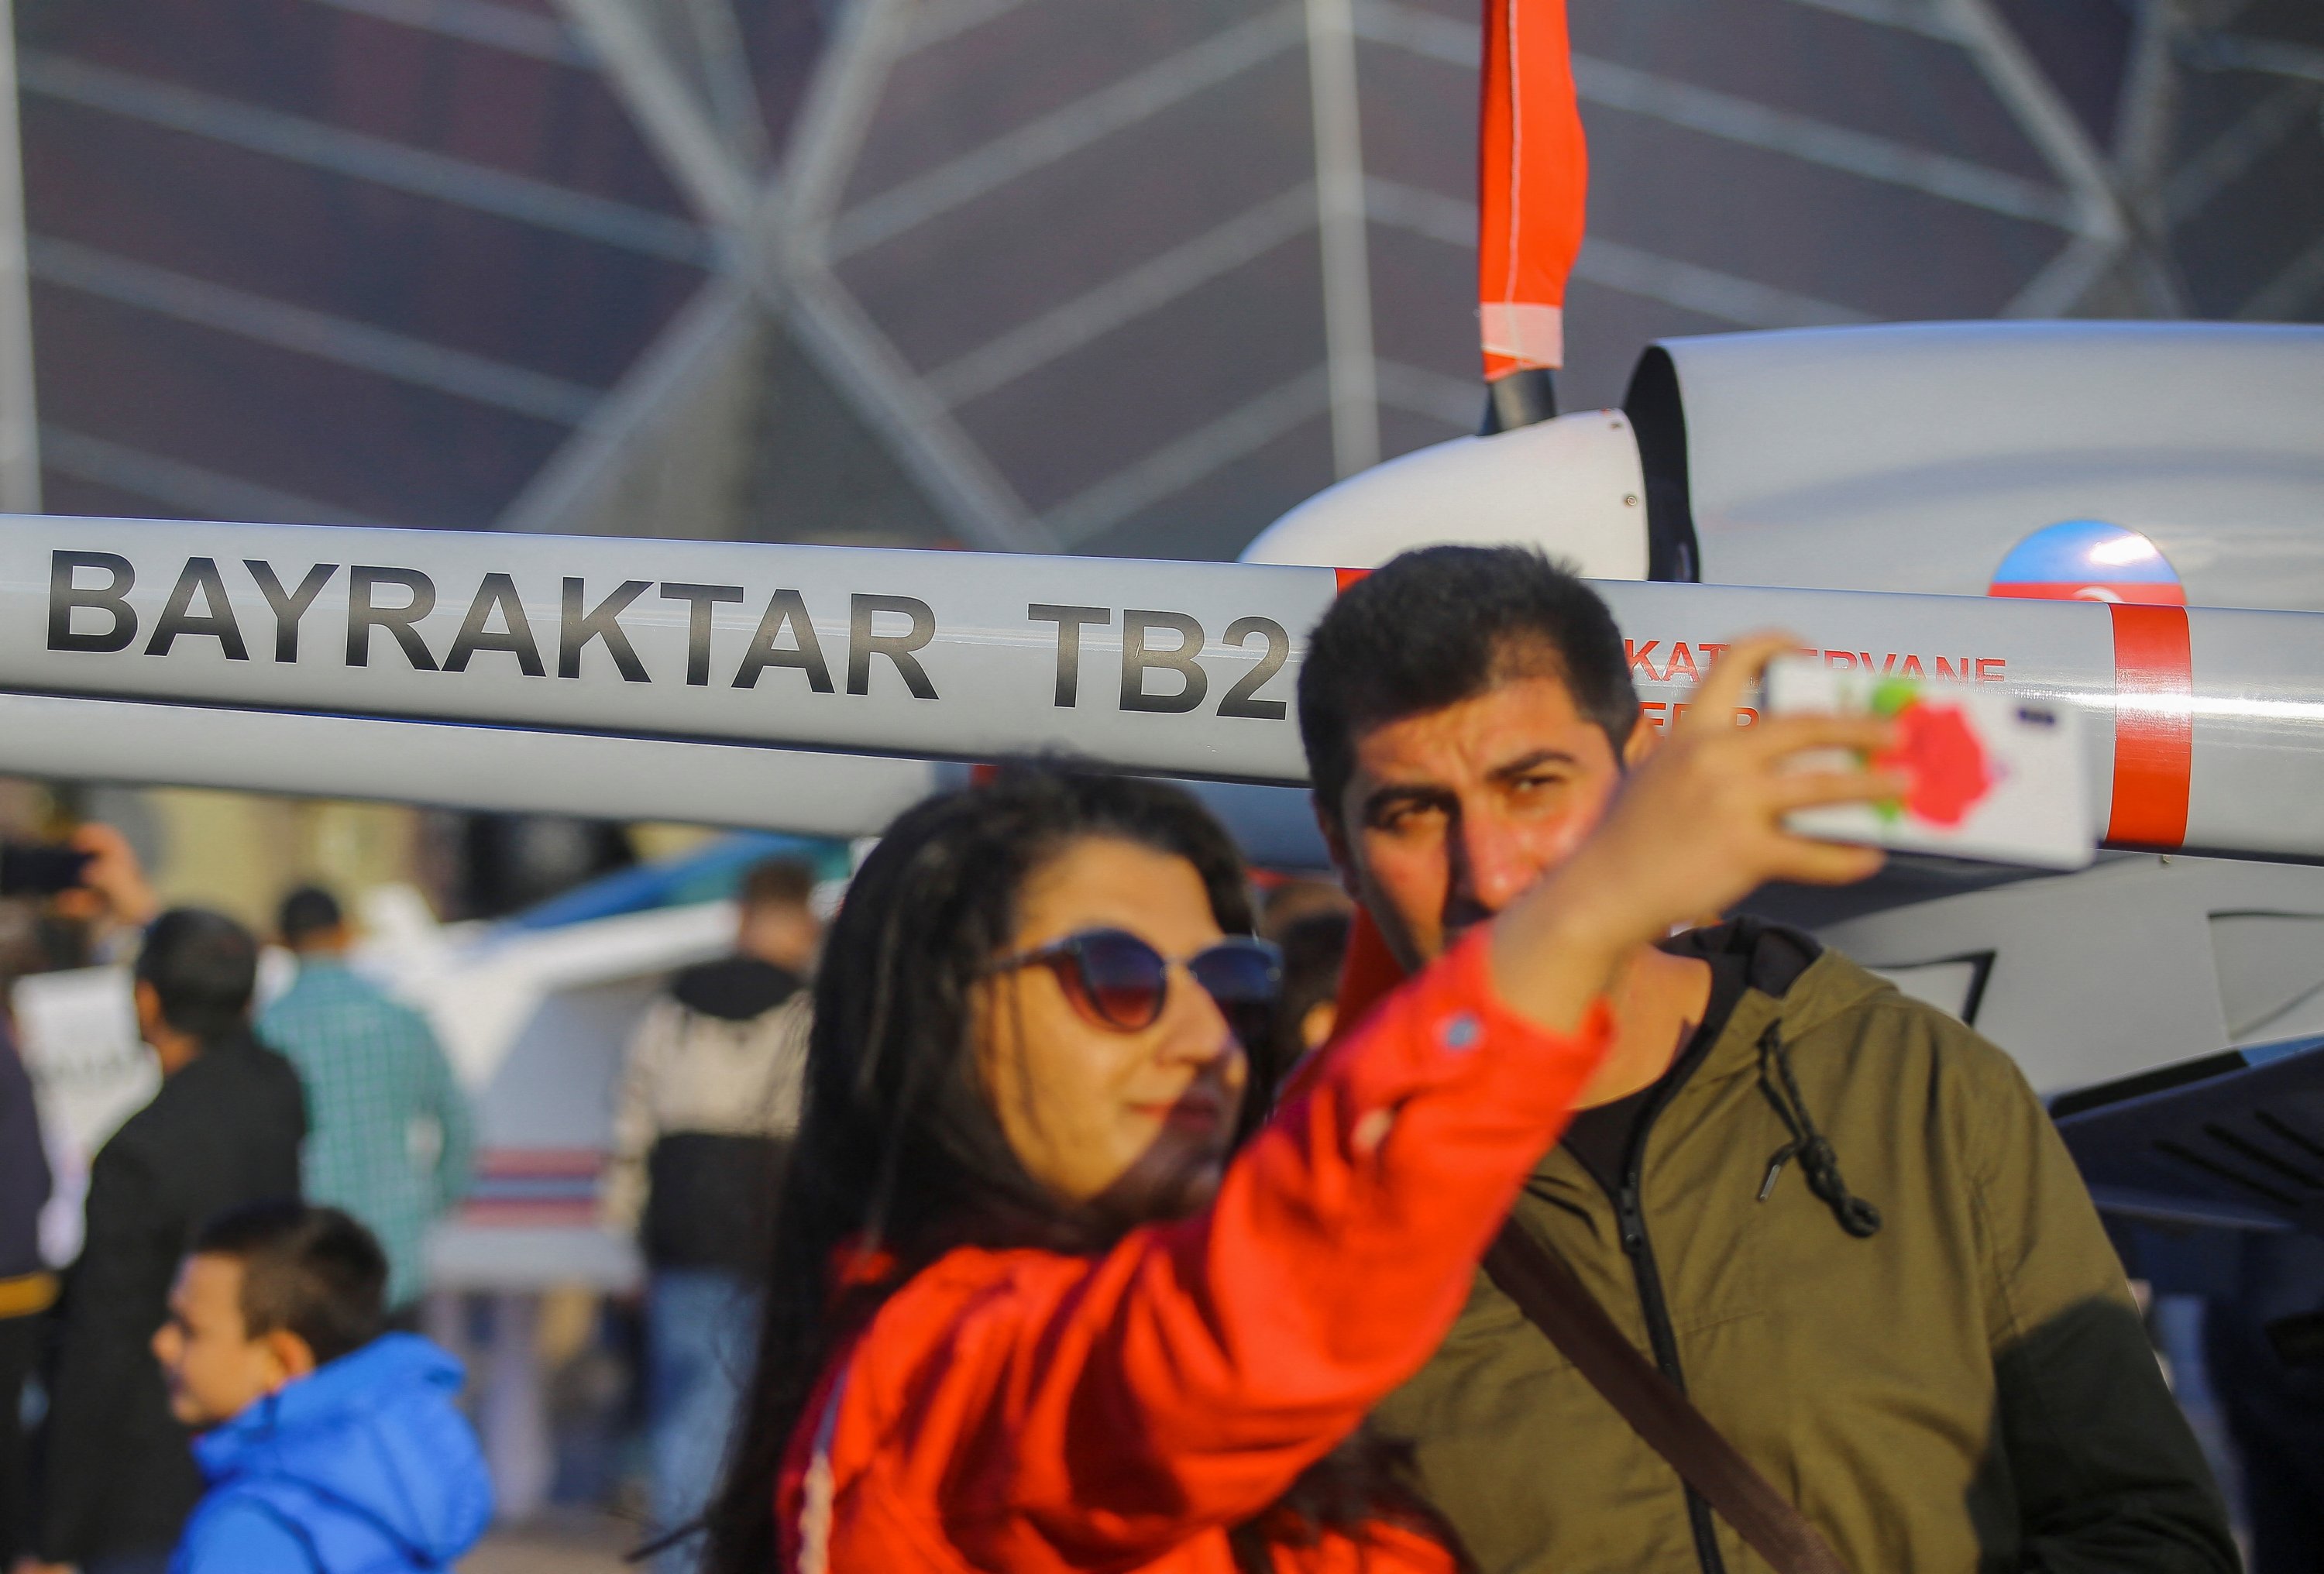 People pose for a picture in front of a Bayraktar TB2 unmanned combat aerial vehicle at the Teknofest aerospace and technology festival in Baku, Azerbaijan, May 27, 2022. (Reuters Photo)